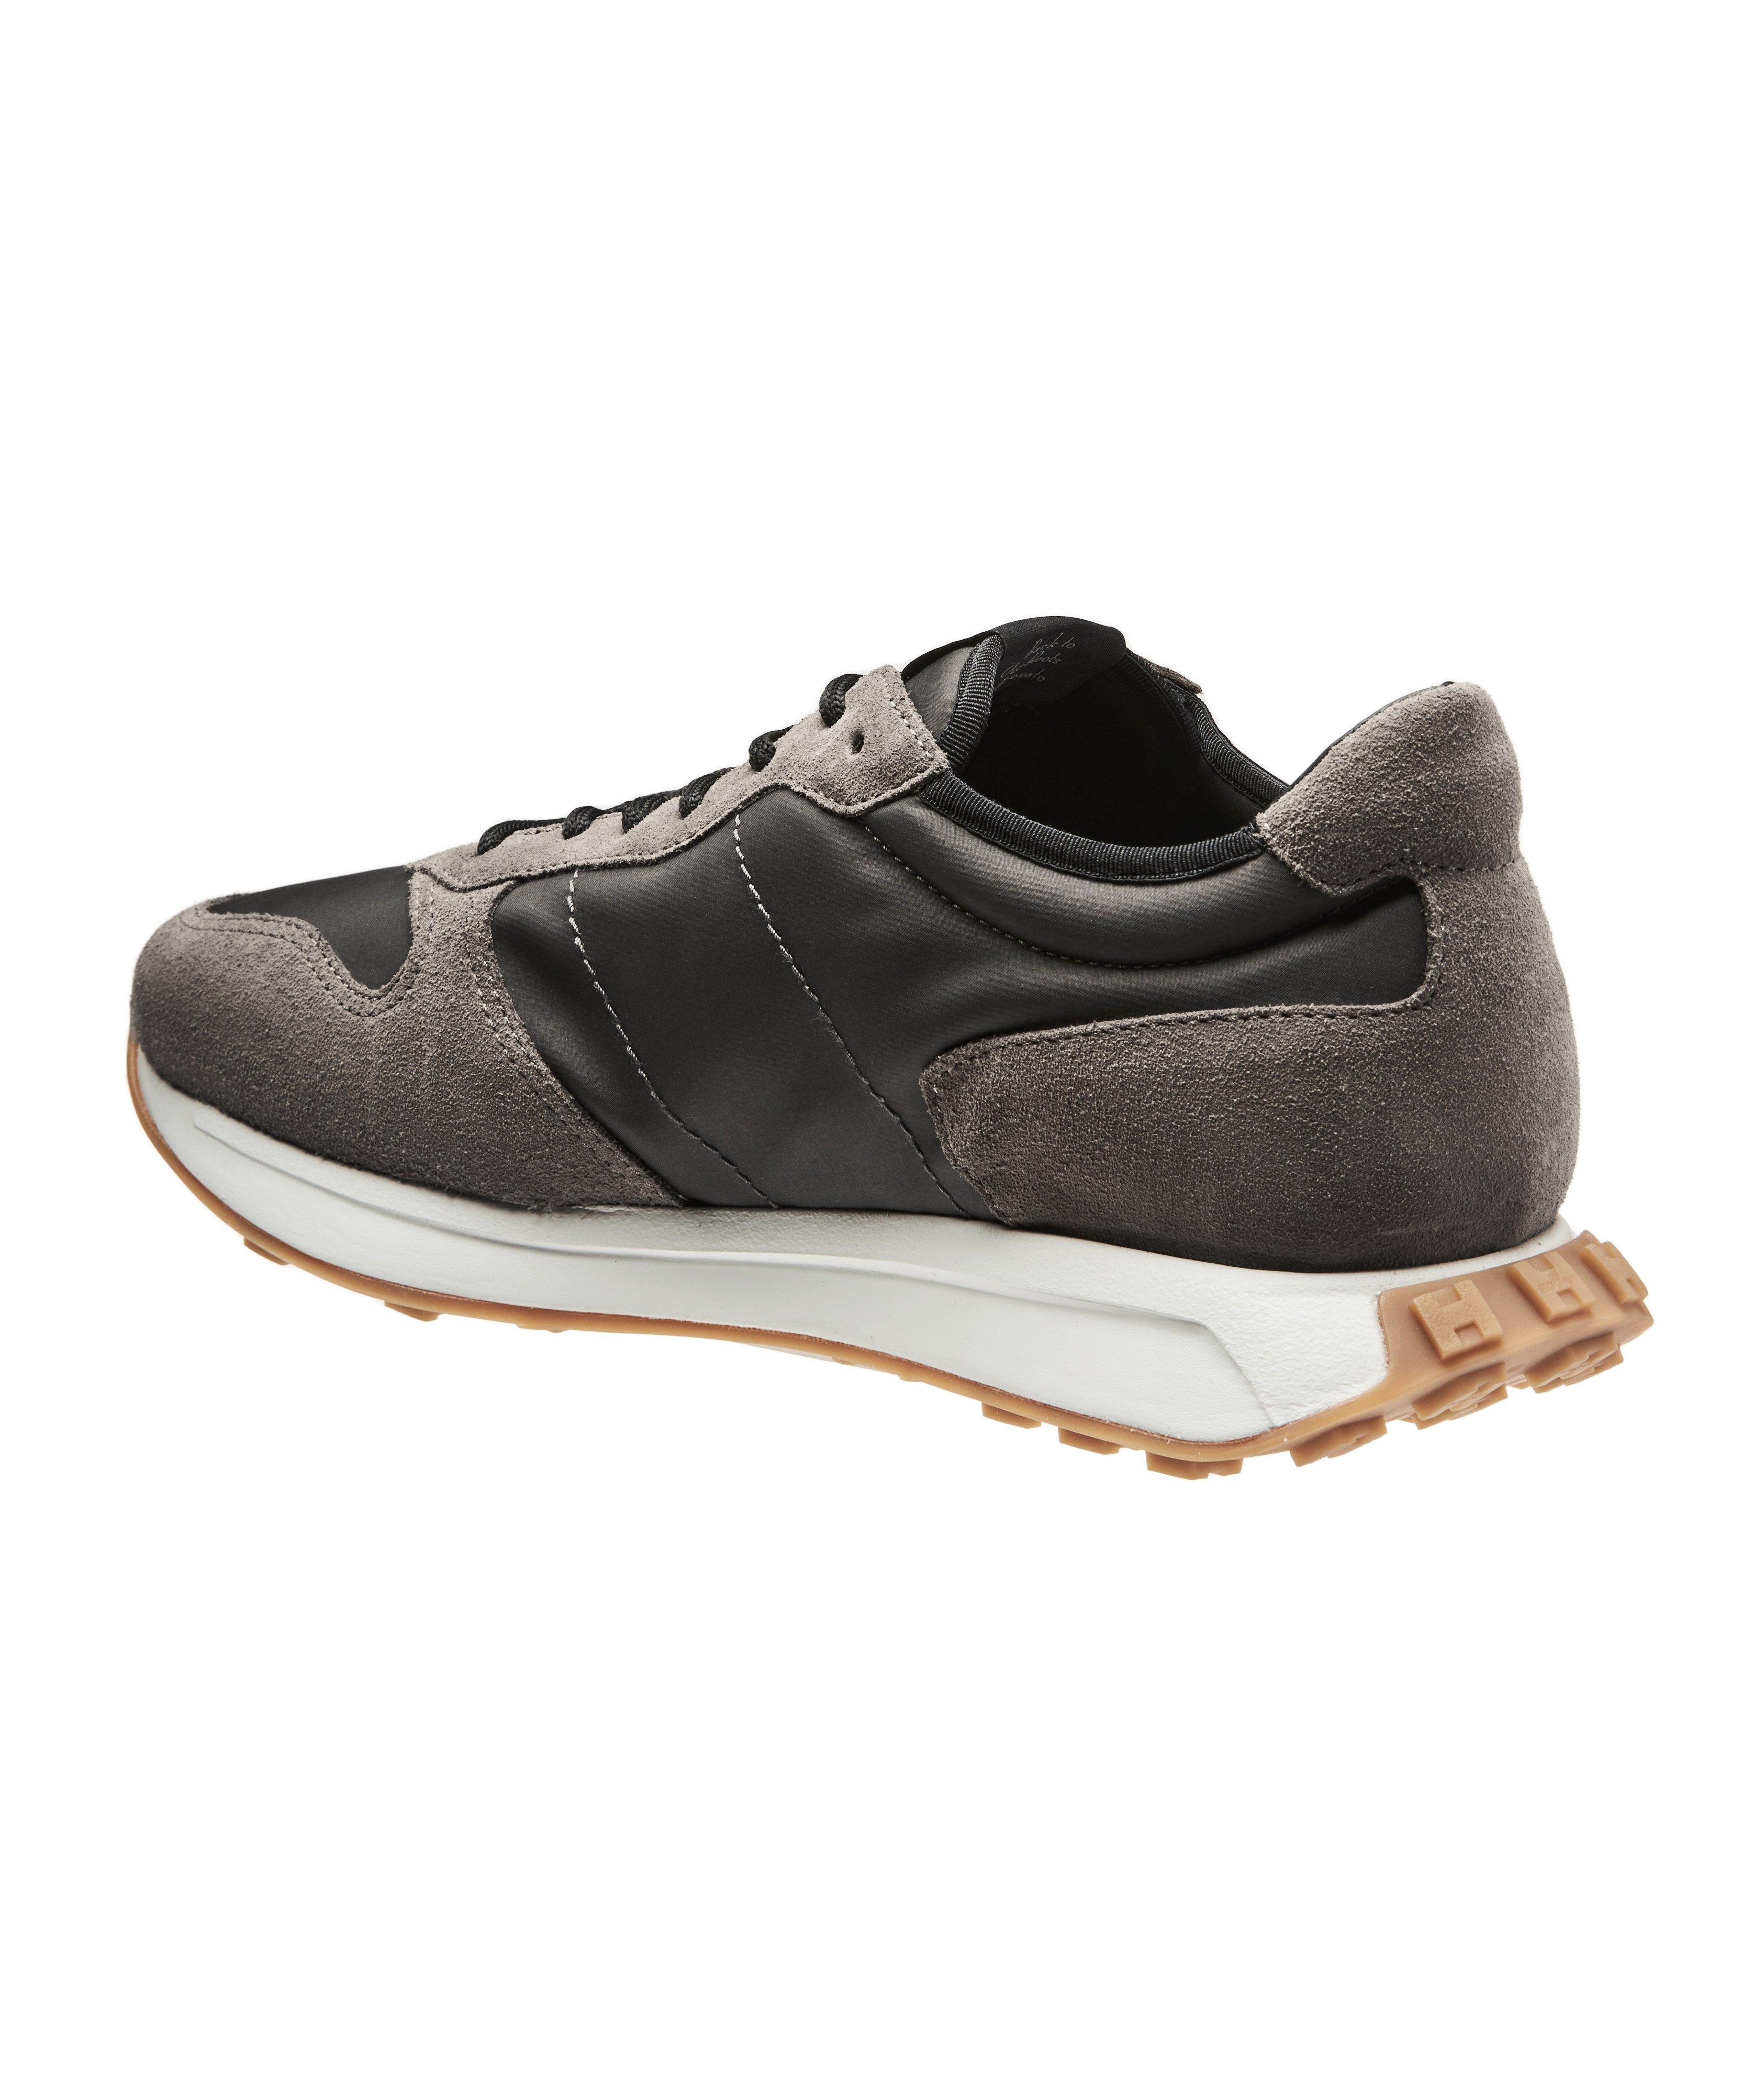 H601 Suede Sneakers image 1